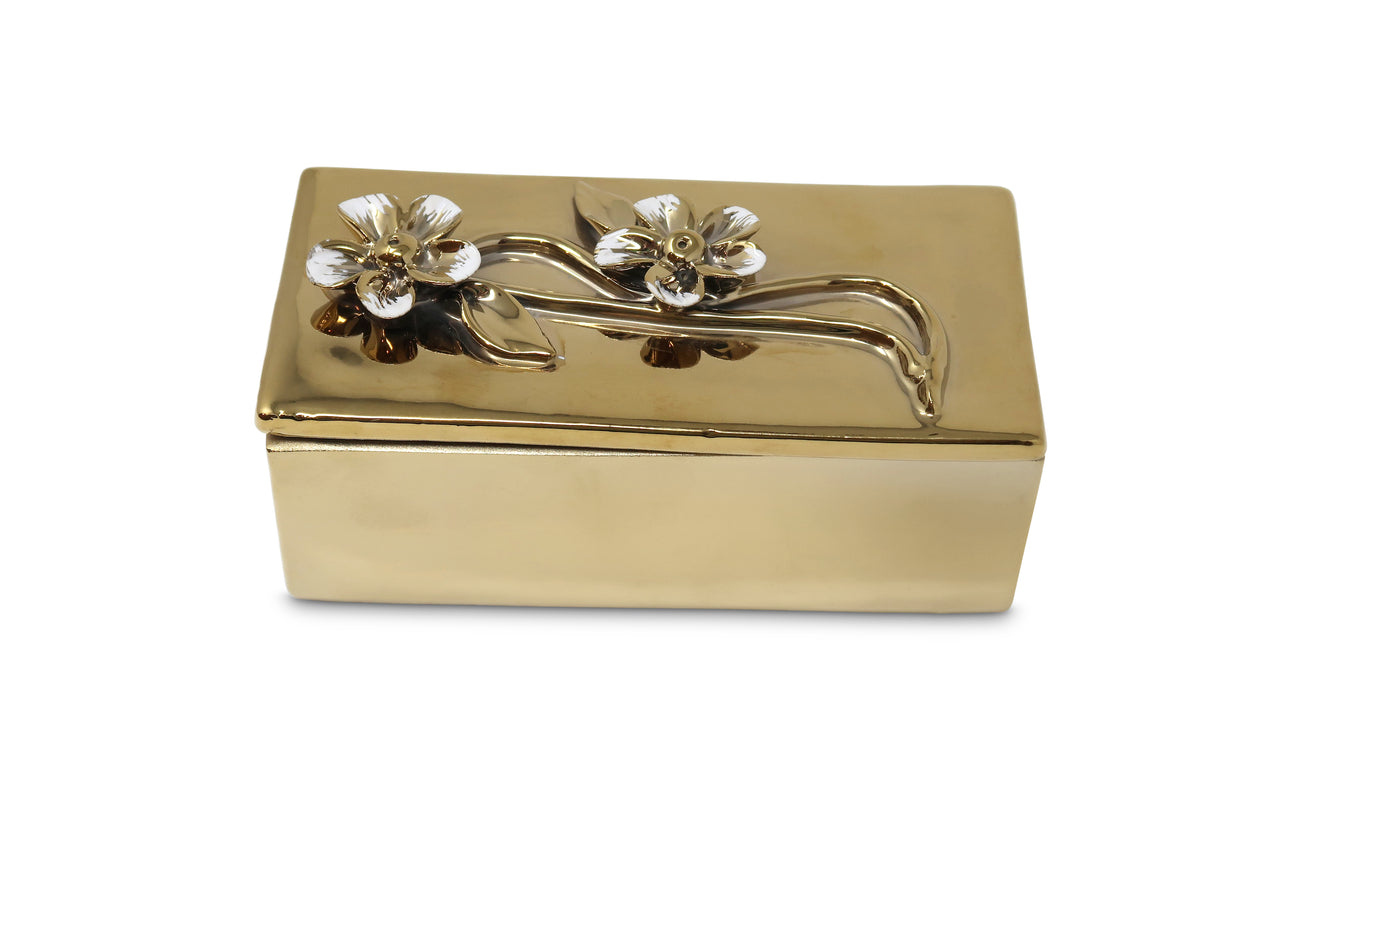 Oblong Gold Decorative Box With Flower Design Lid